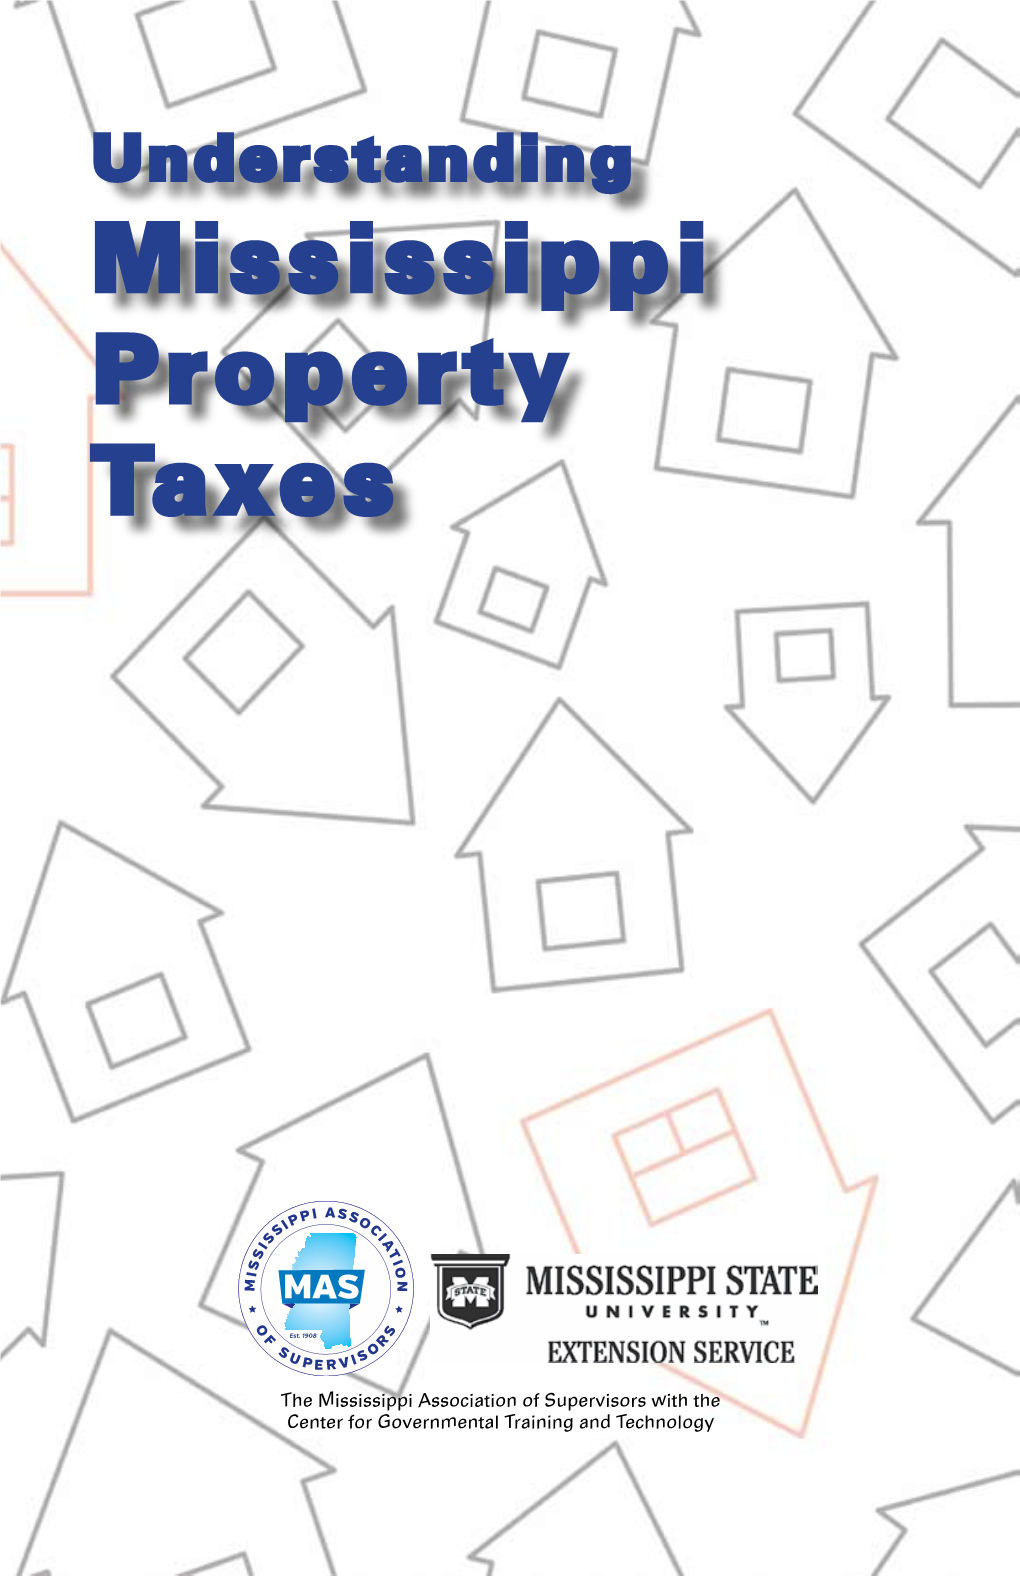 Mississippi Property Taxes